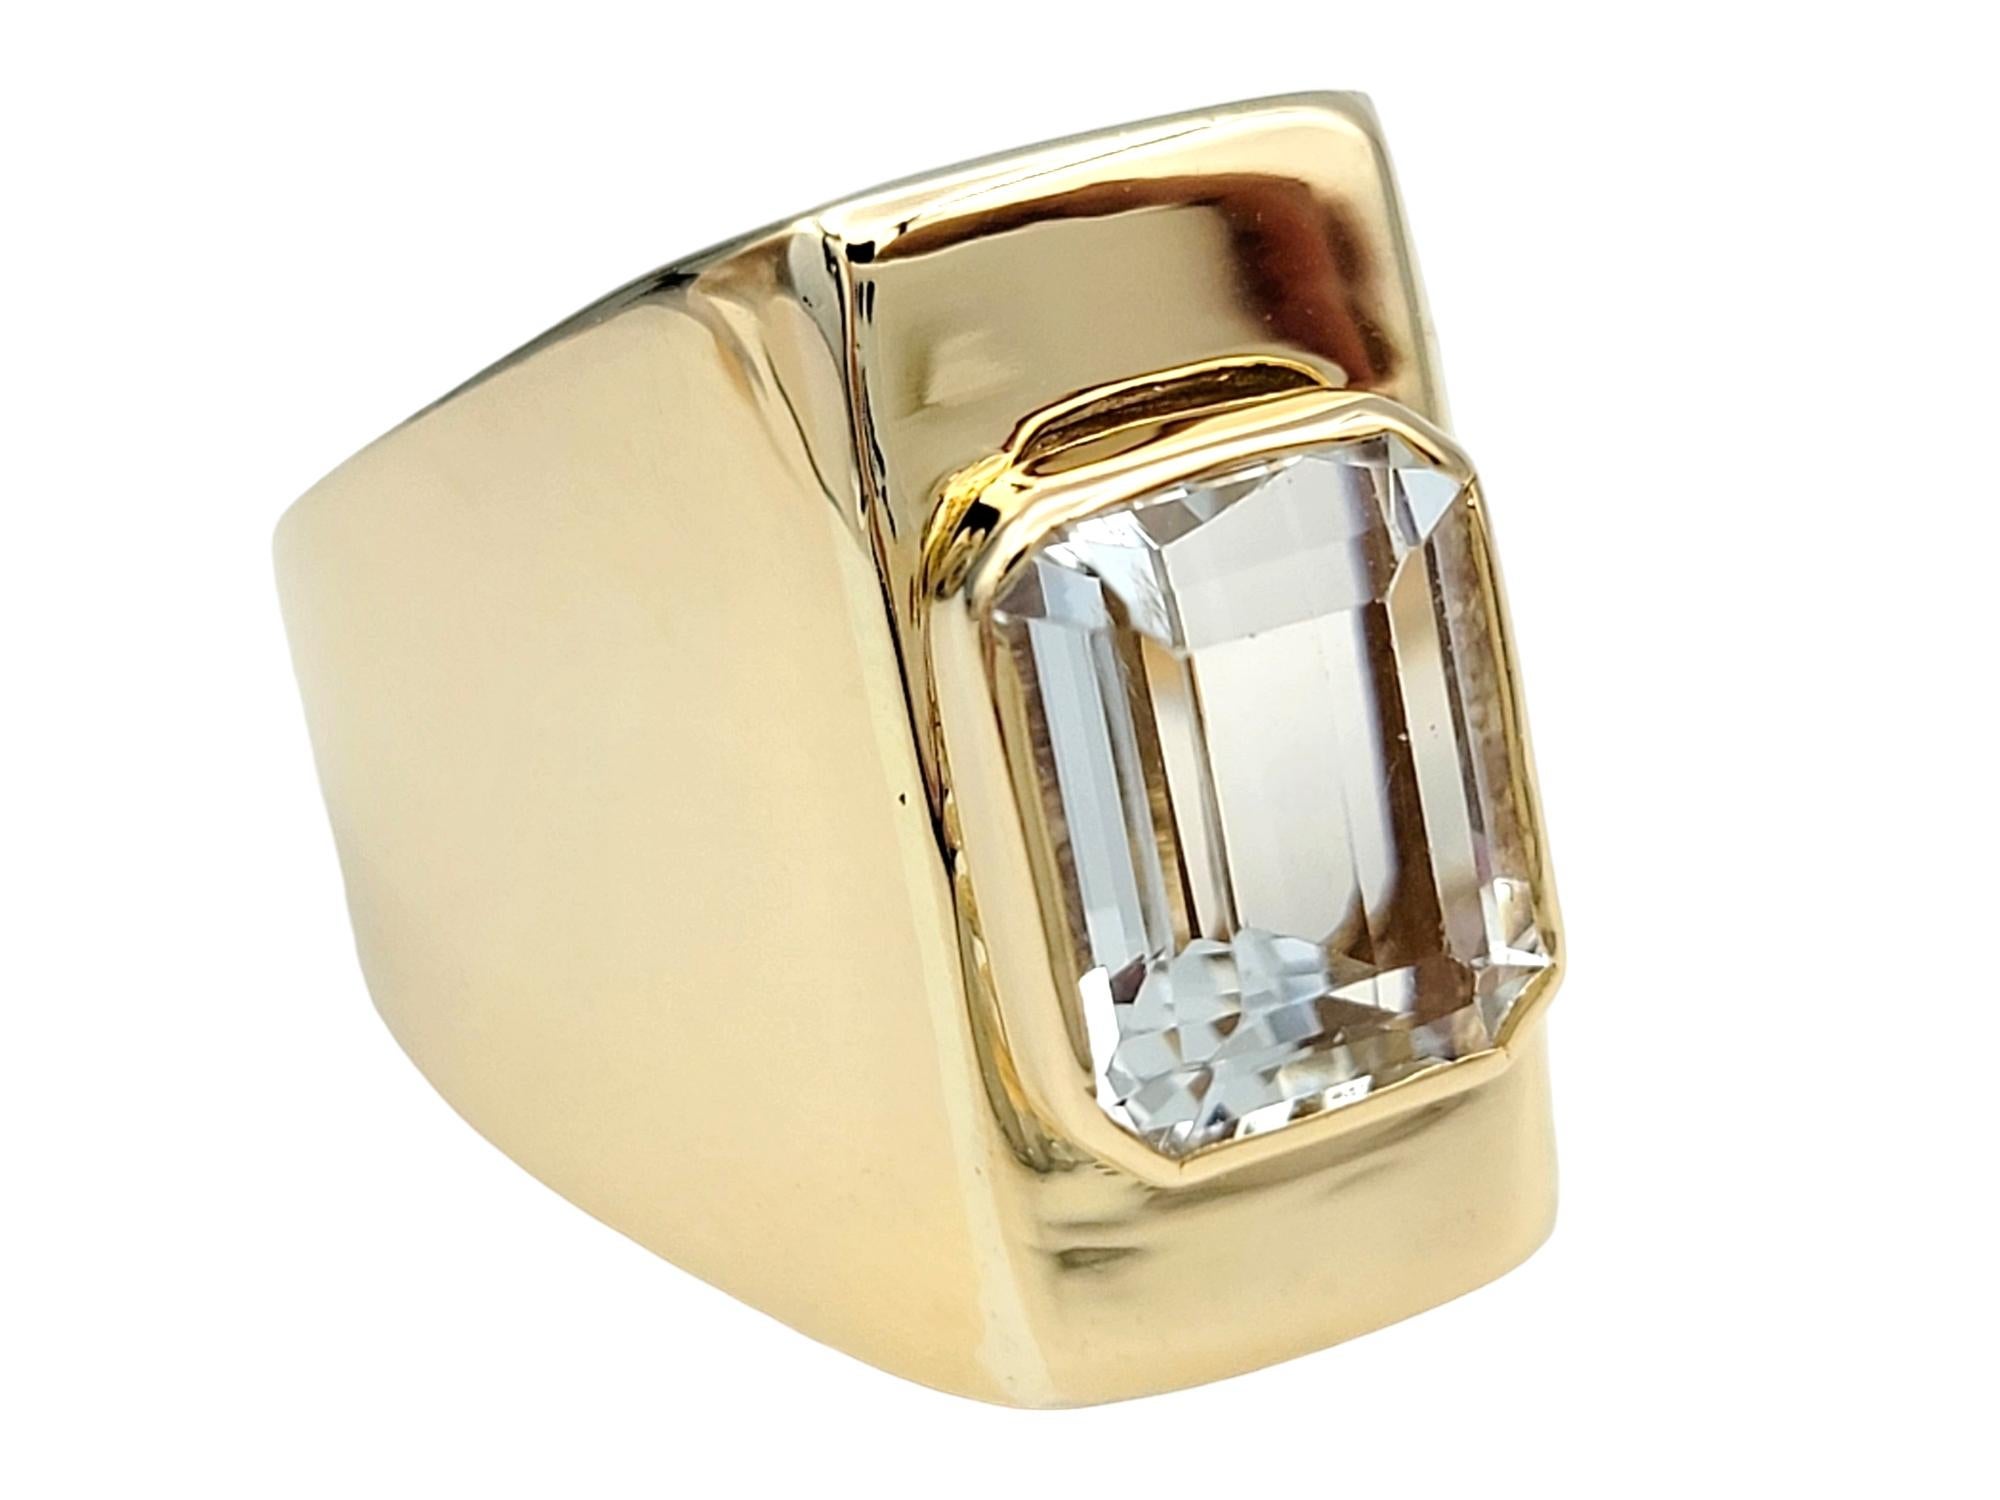 Ring Size: 6

This unique solitaire goshenite beryl ring set in 14 karat yellow gold exudes understated elegance and sophistication. The centerpiece of this exquisite ring is the goshenite beryl, a colorless gemstone prized for its clarity and